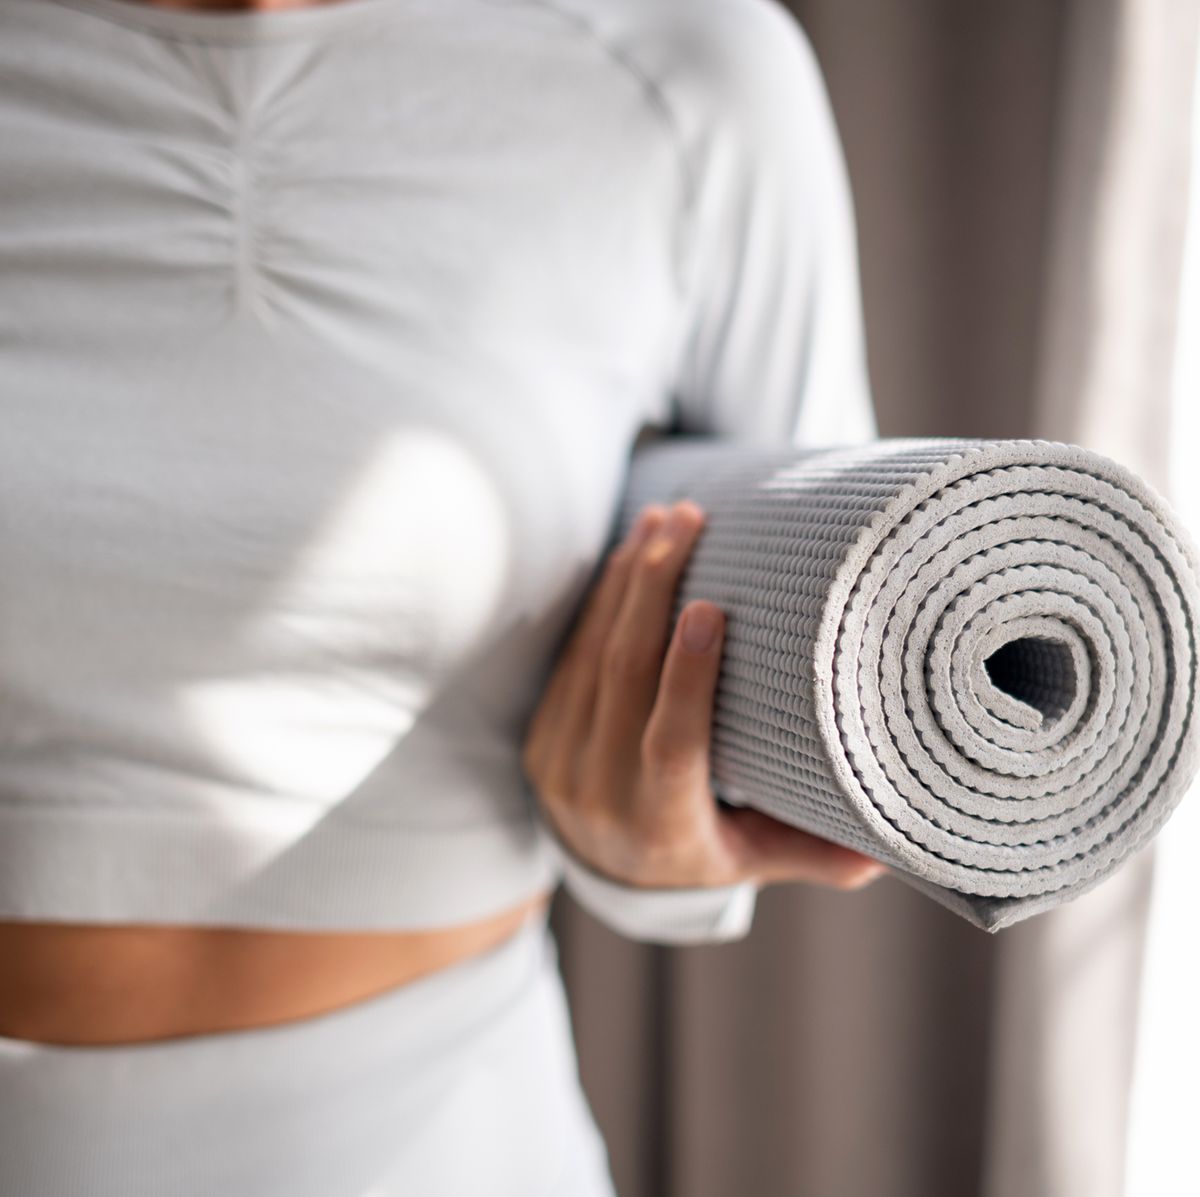 https://hips.hearstapps.com/hmg-prod/images/the-body-of-a-slender-girl-holds-a-yoga-mat-in-her-royalty-free-image-1695218867.jpg?crop=0.668xw:1.00xh;0.181xw,0&resize=1200:*